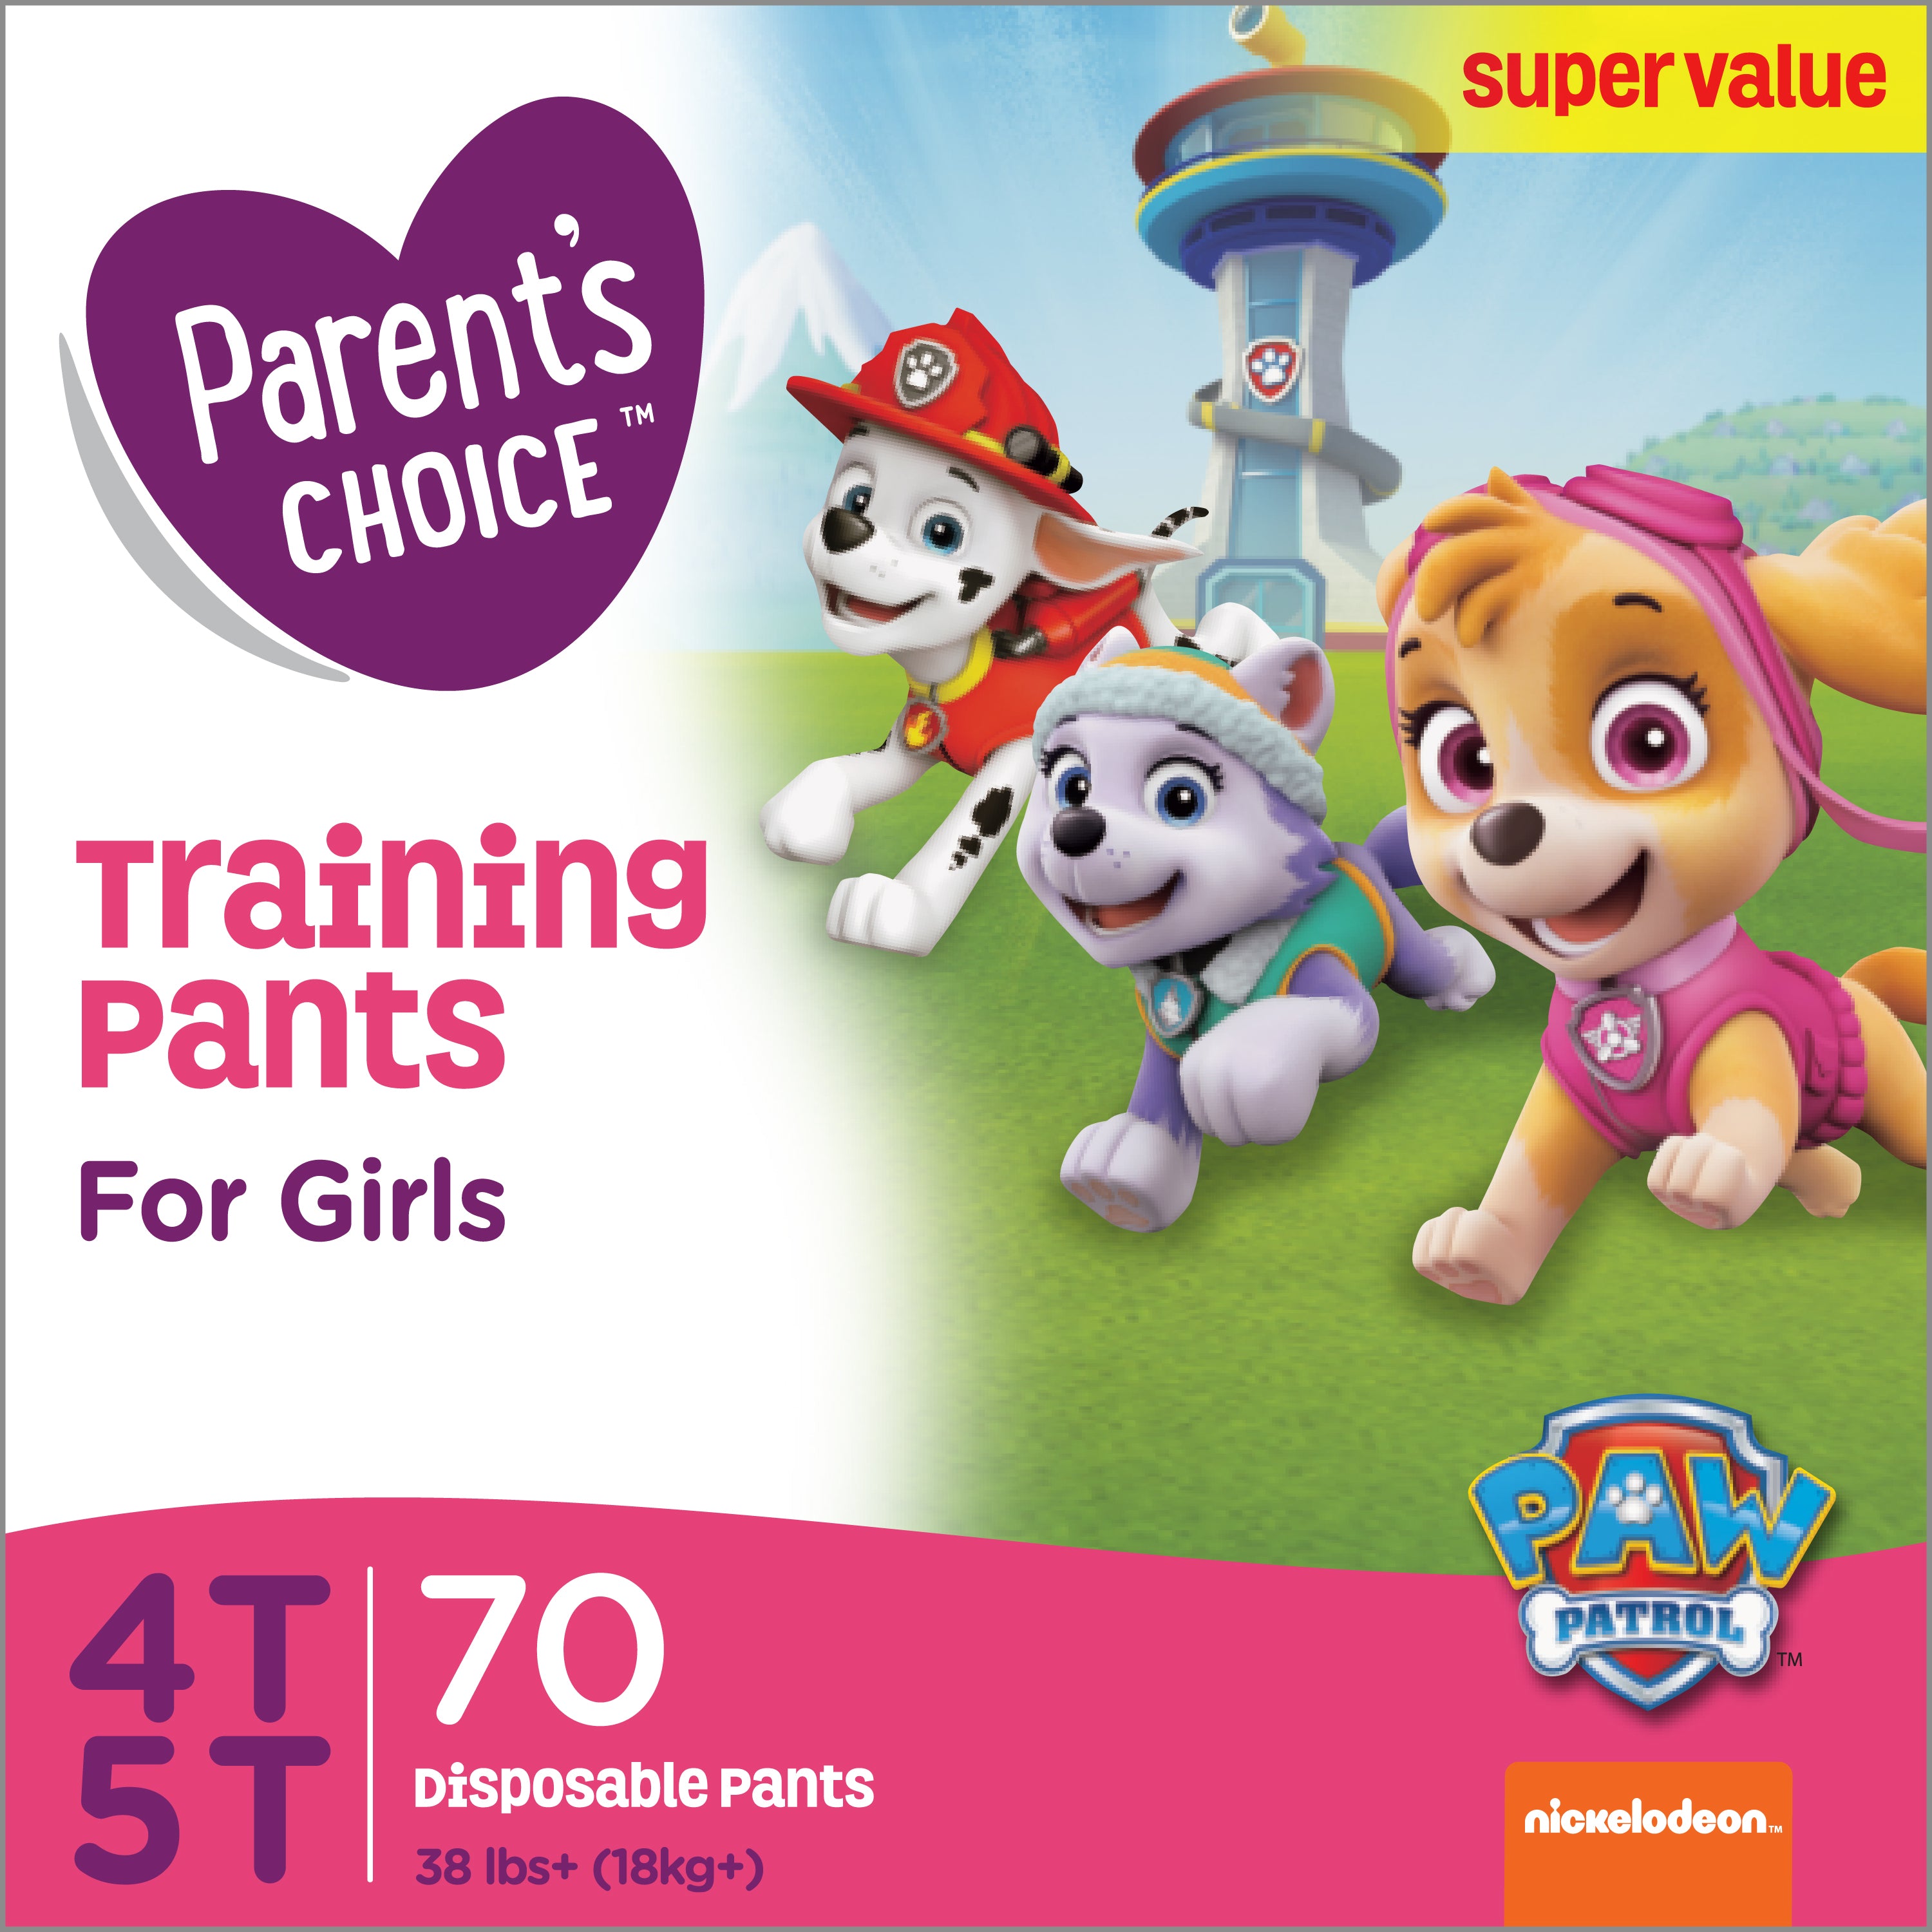 Parent's Choice Paw Patrol Training Pants for Girls, 3T/4T, 21